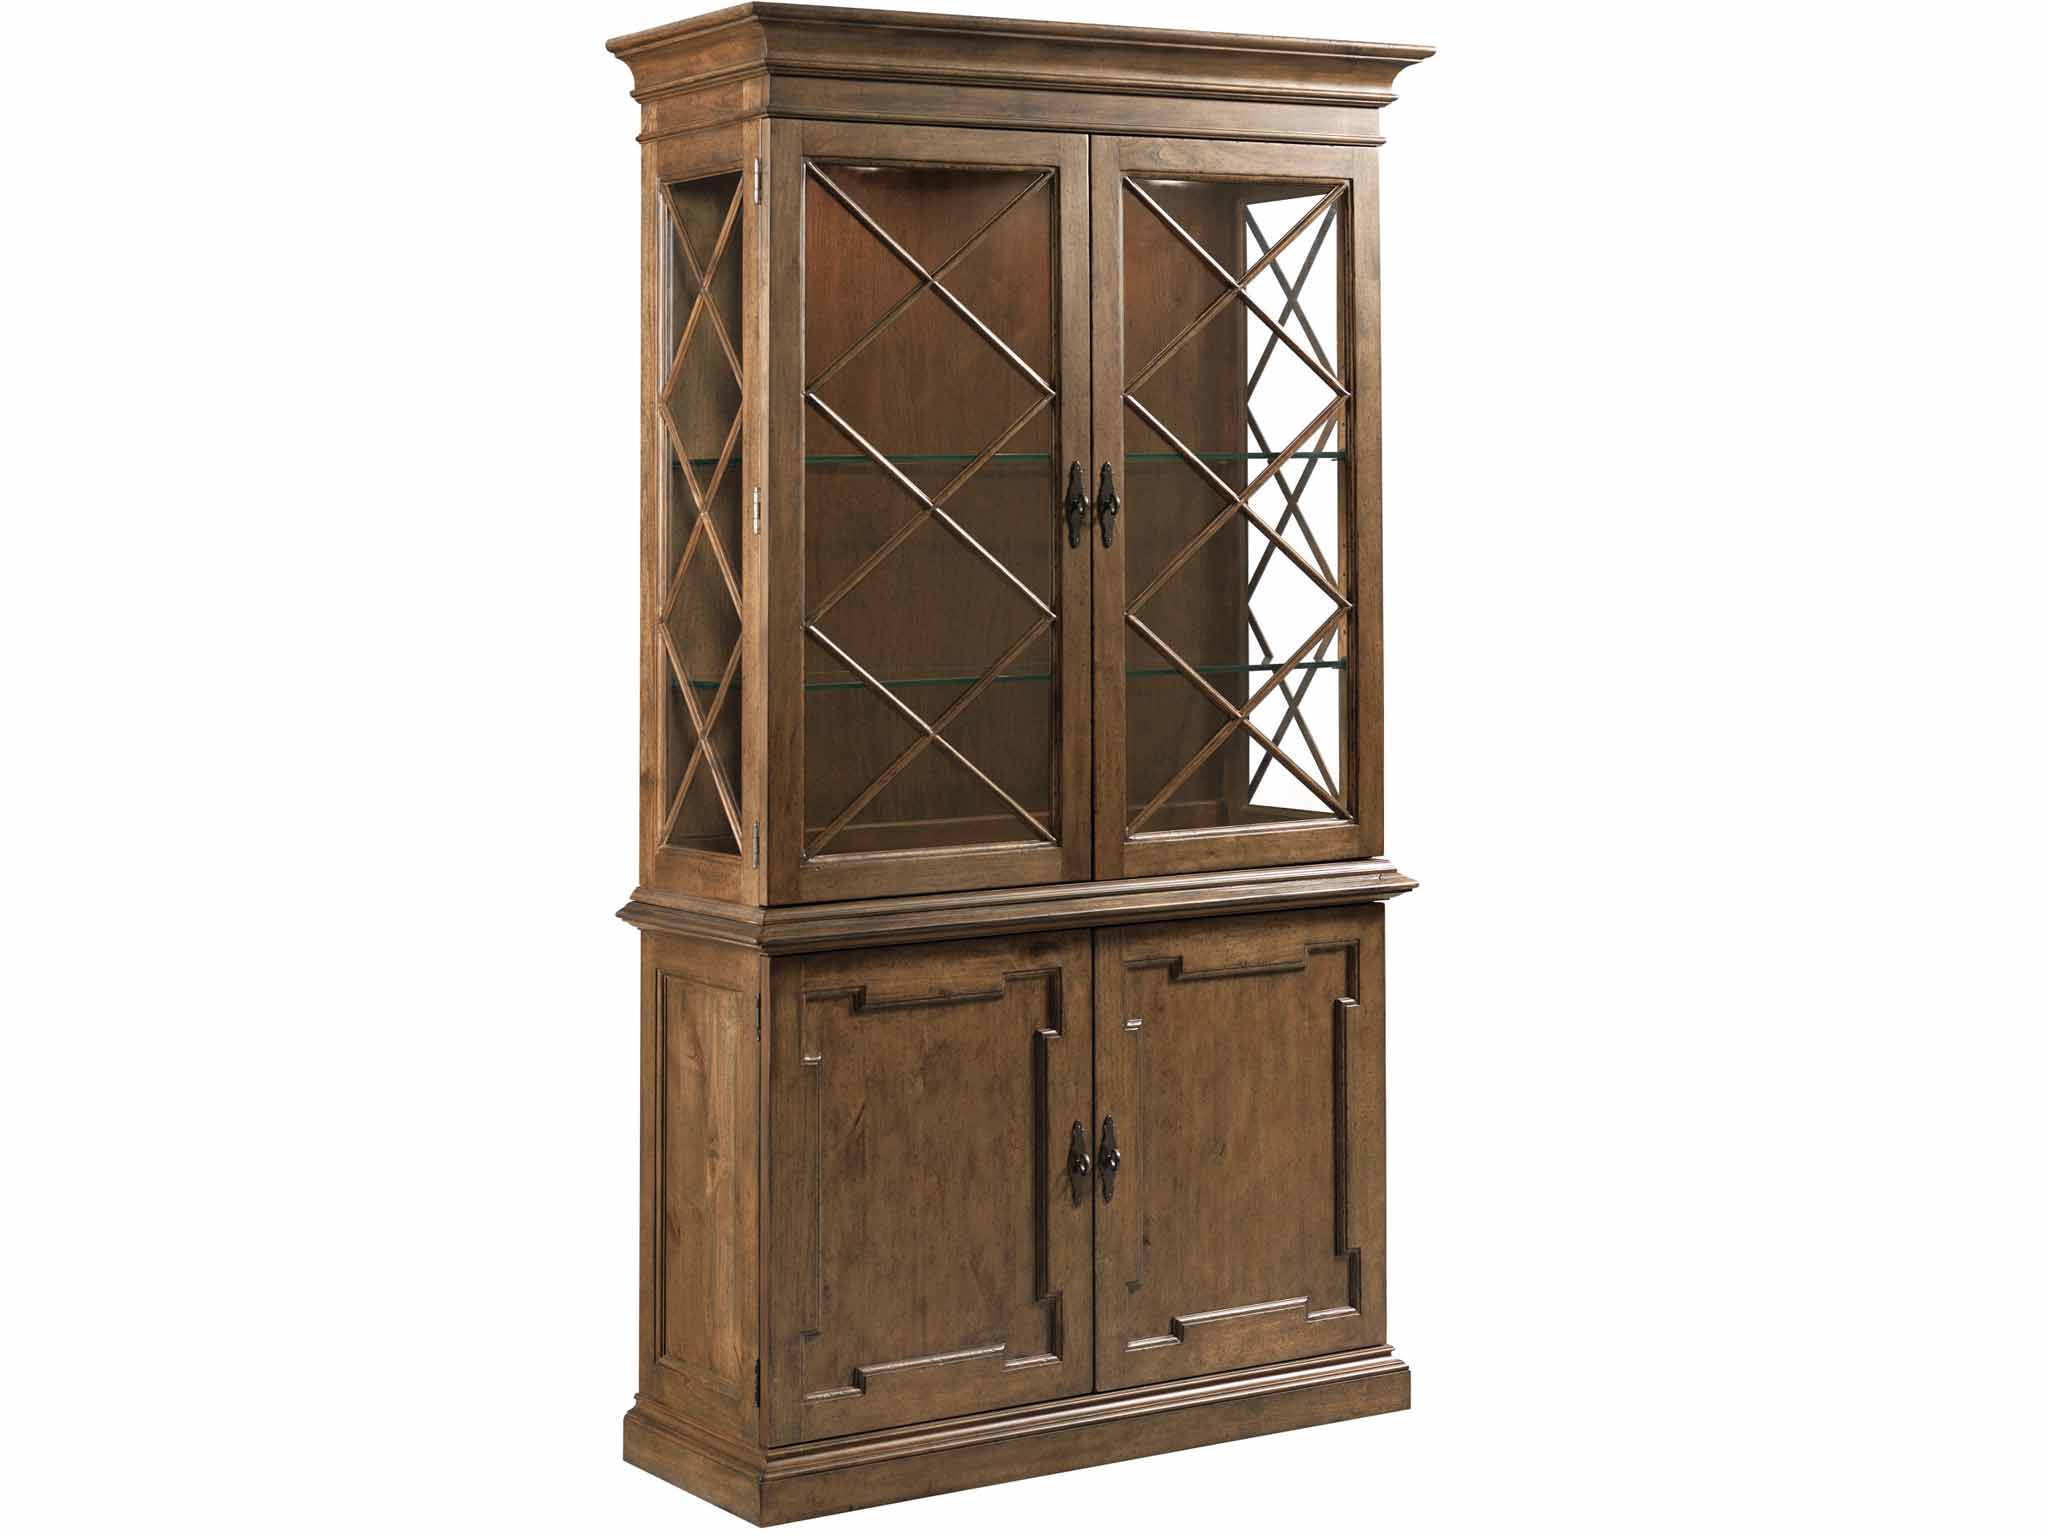 Kincaid 024-830P Ansley Mortimer Display Cabinet Complete